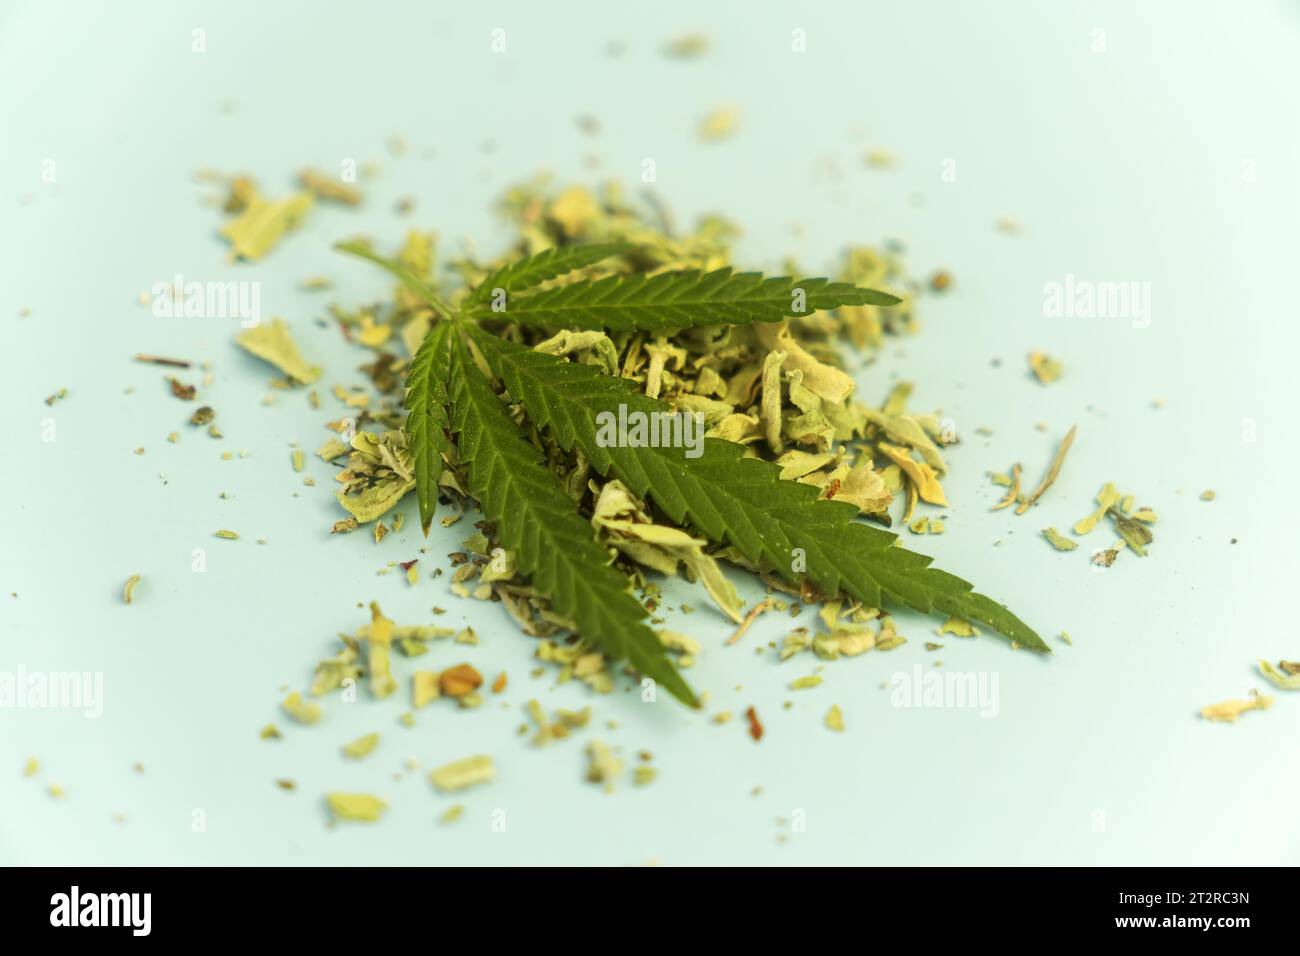 fresh and dry hemp. Preparing cannabis joint with tobacco and rolling paper with marijuana bud on blue background. The insinuation of marijuana abuse. Stock Photo